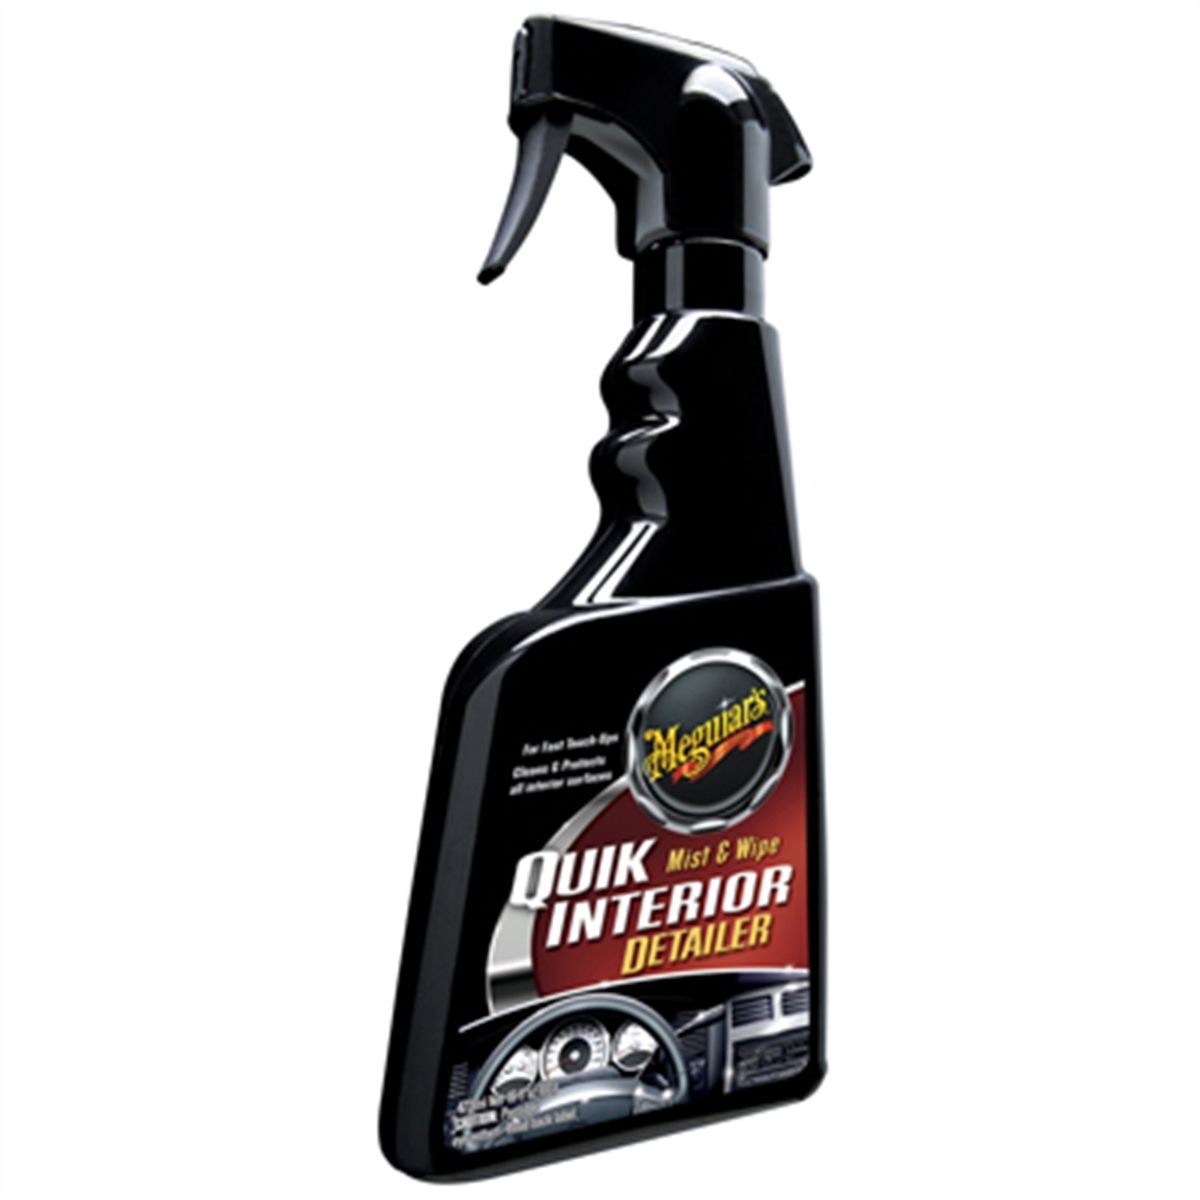 Smooth SurfaceÂ® Clay Kit, Meguiars